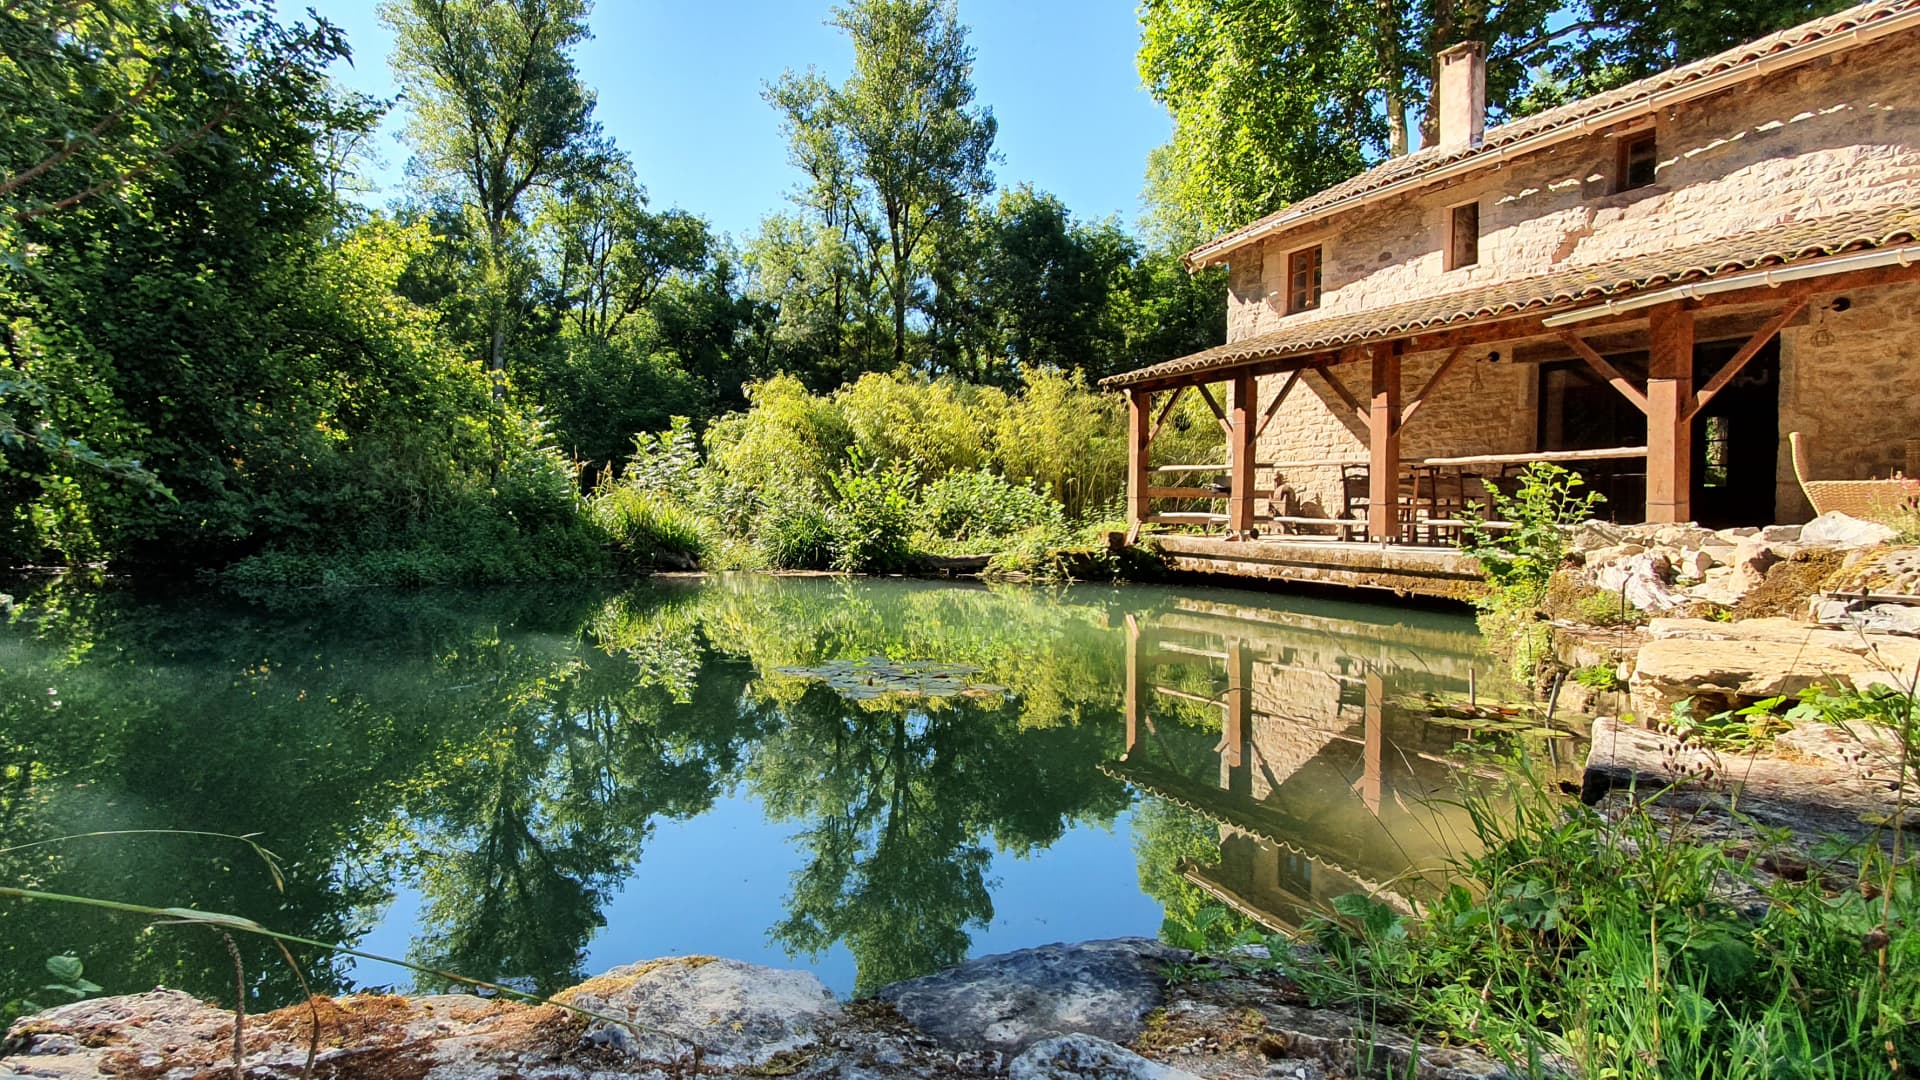 This property has its own millpond in France.